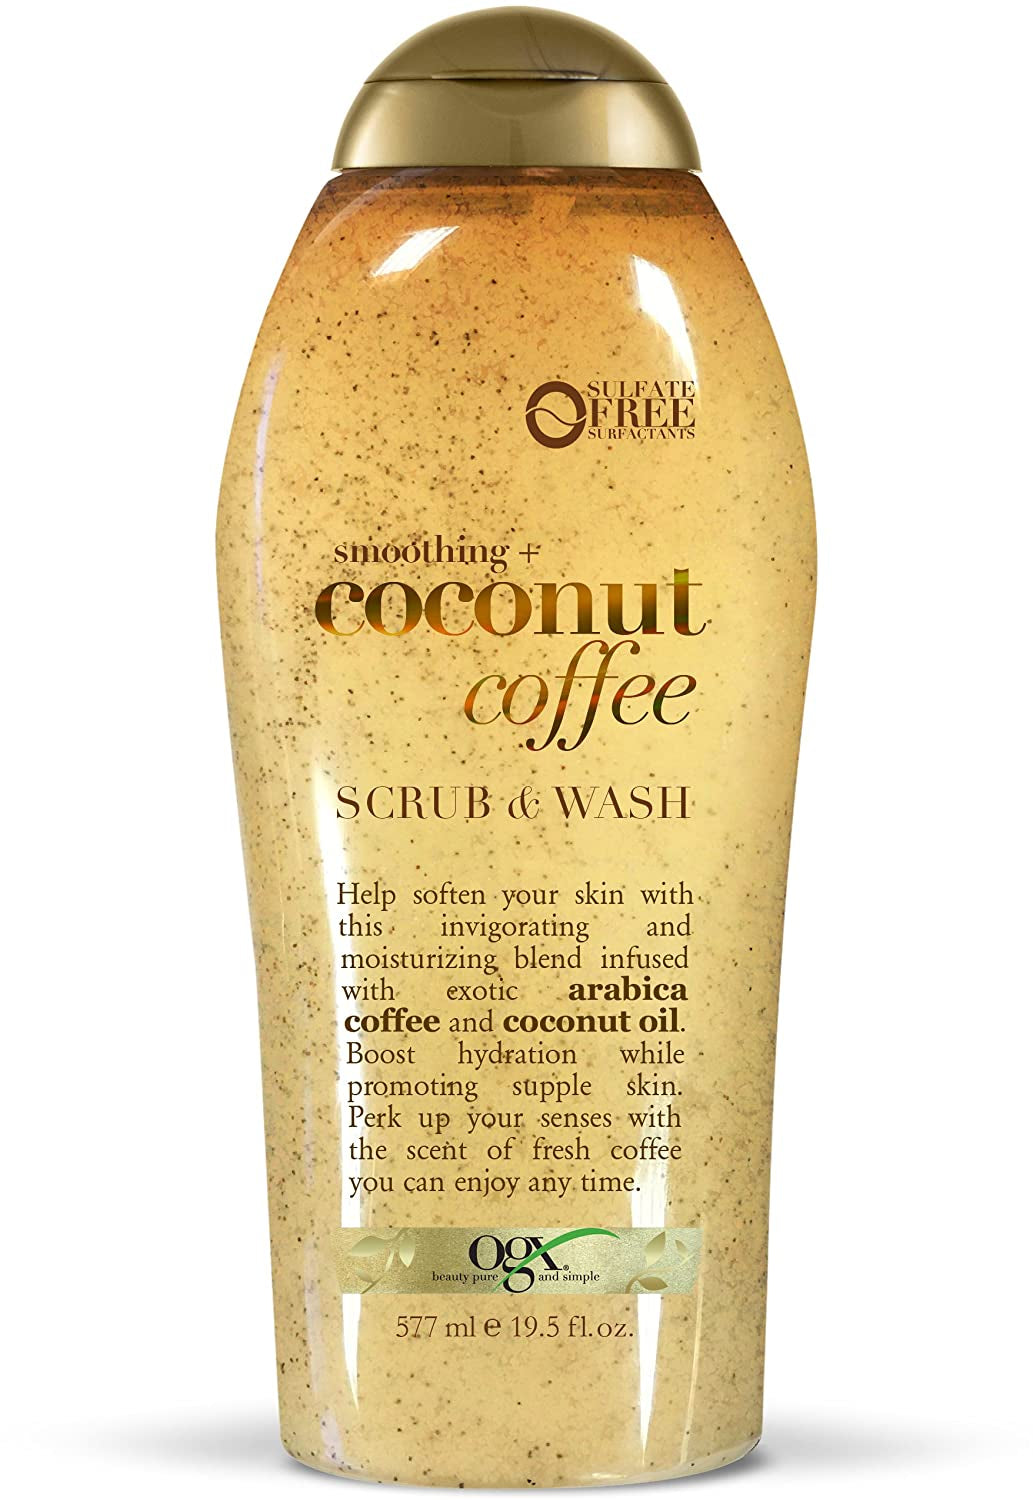 Smoothing + Coconut Coffee Exfoliating Body Scrub with Arabica Coffee & Coconut Oil, Moisturizing Body Wash for Dry Skin, Paraben-Free with Sulfate-Free Surfactants, 19.5 Fl Oz